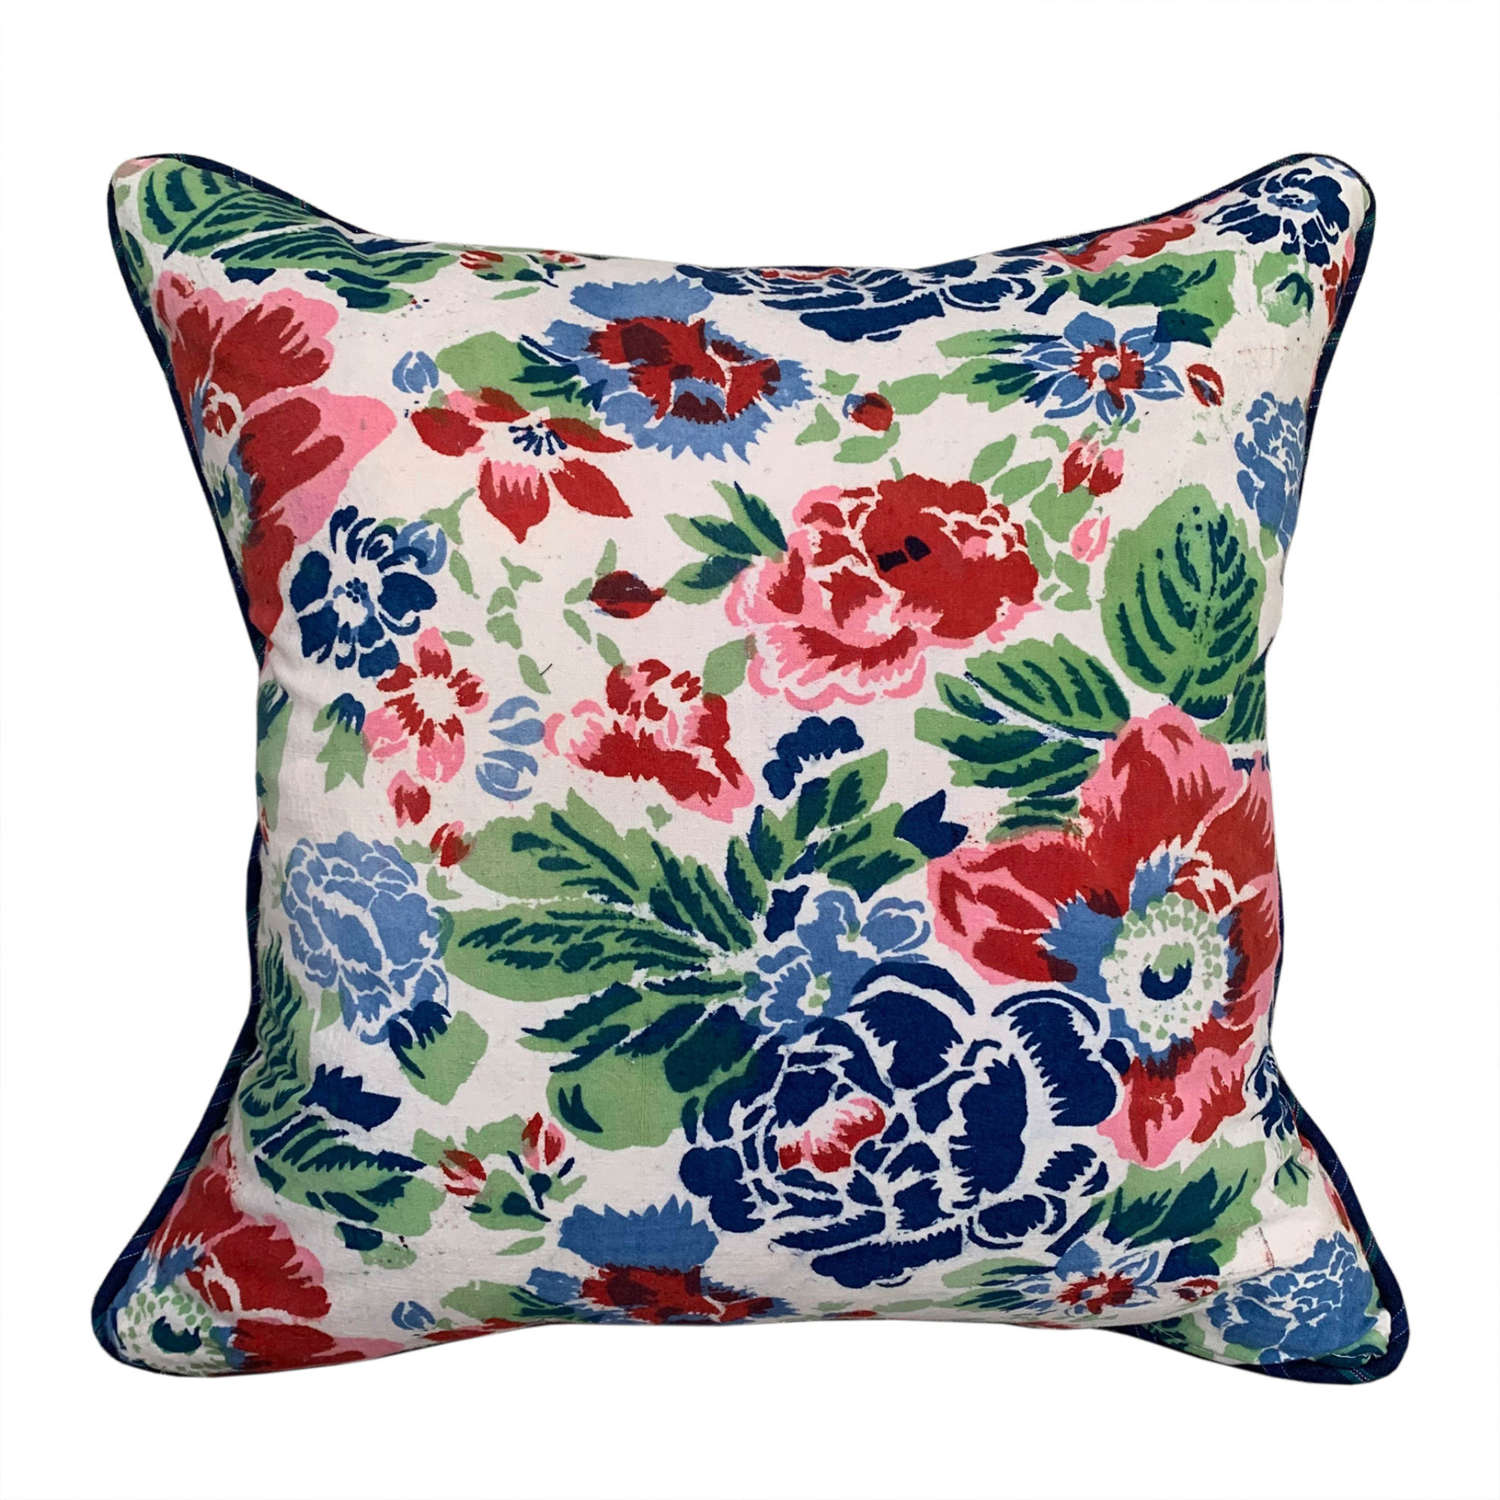 Floral cushions with stripey piping